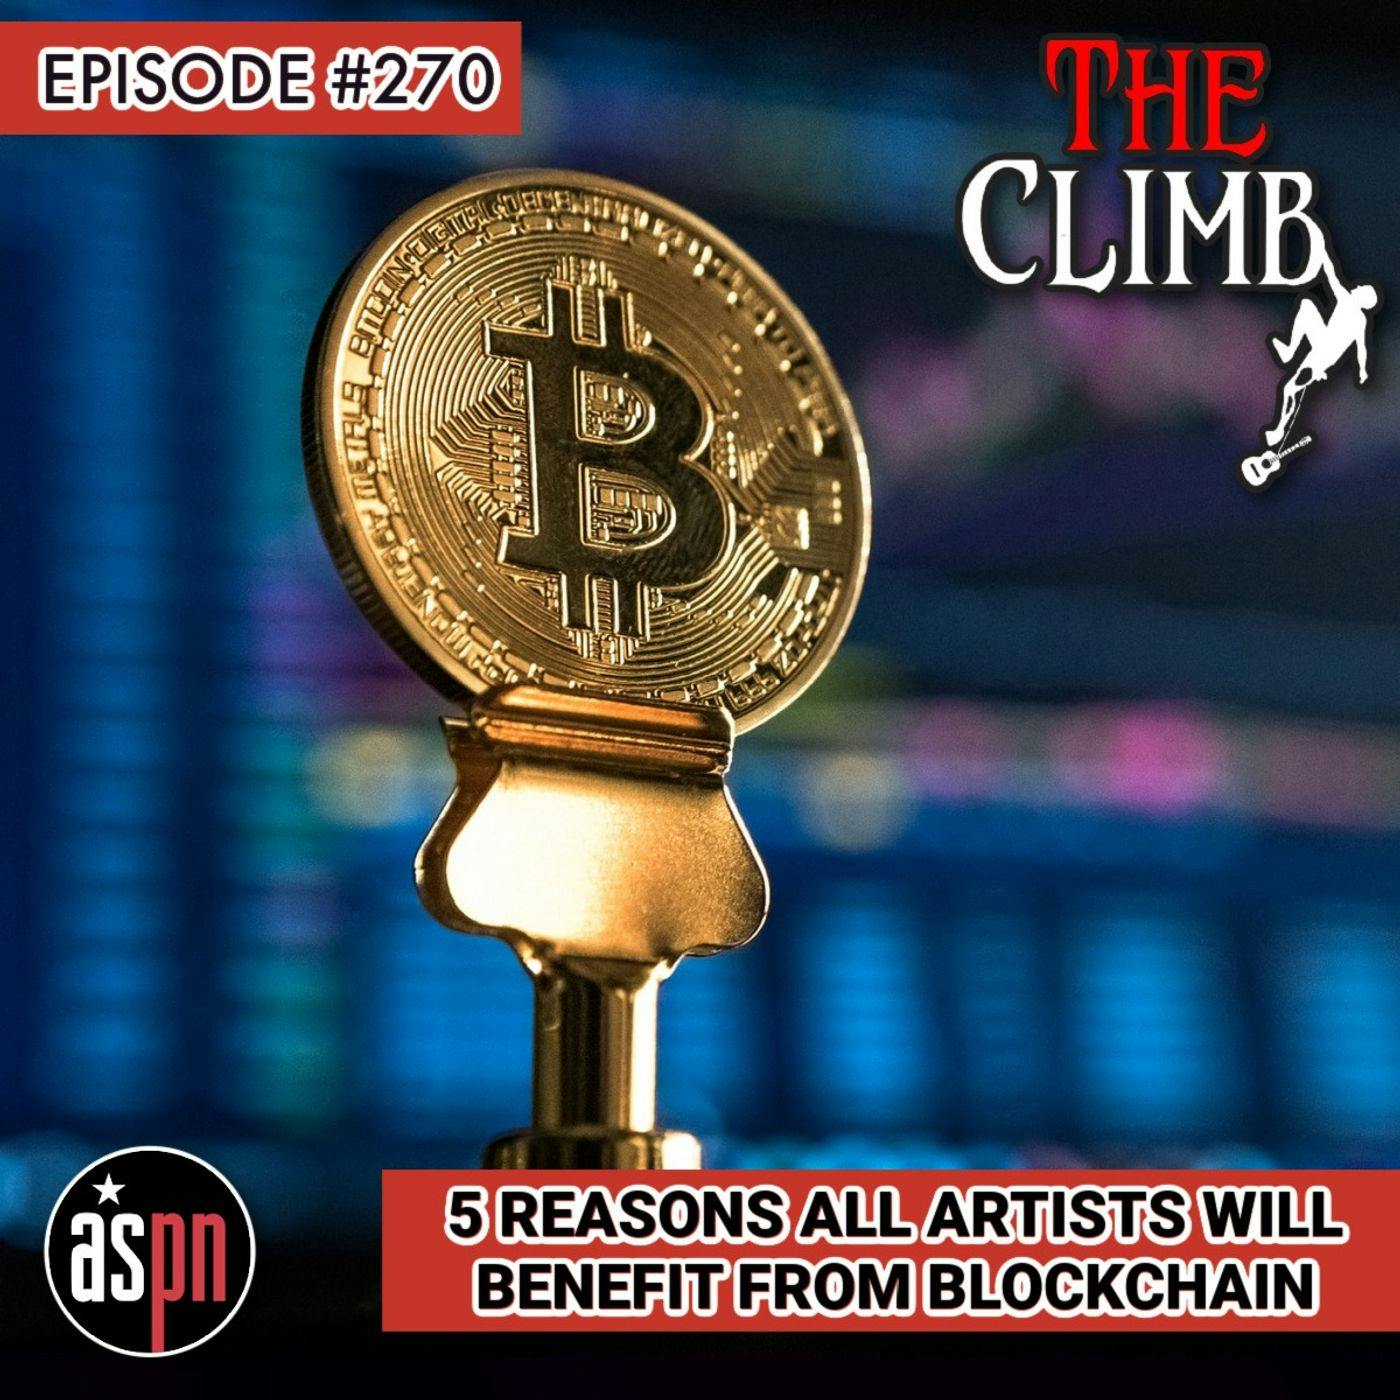 Episode #270: 5 Reasons All Artists Will Benefit From Blockchain